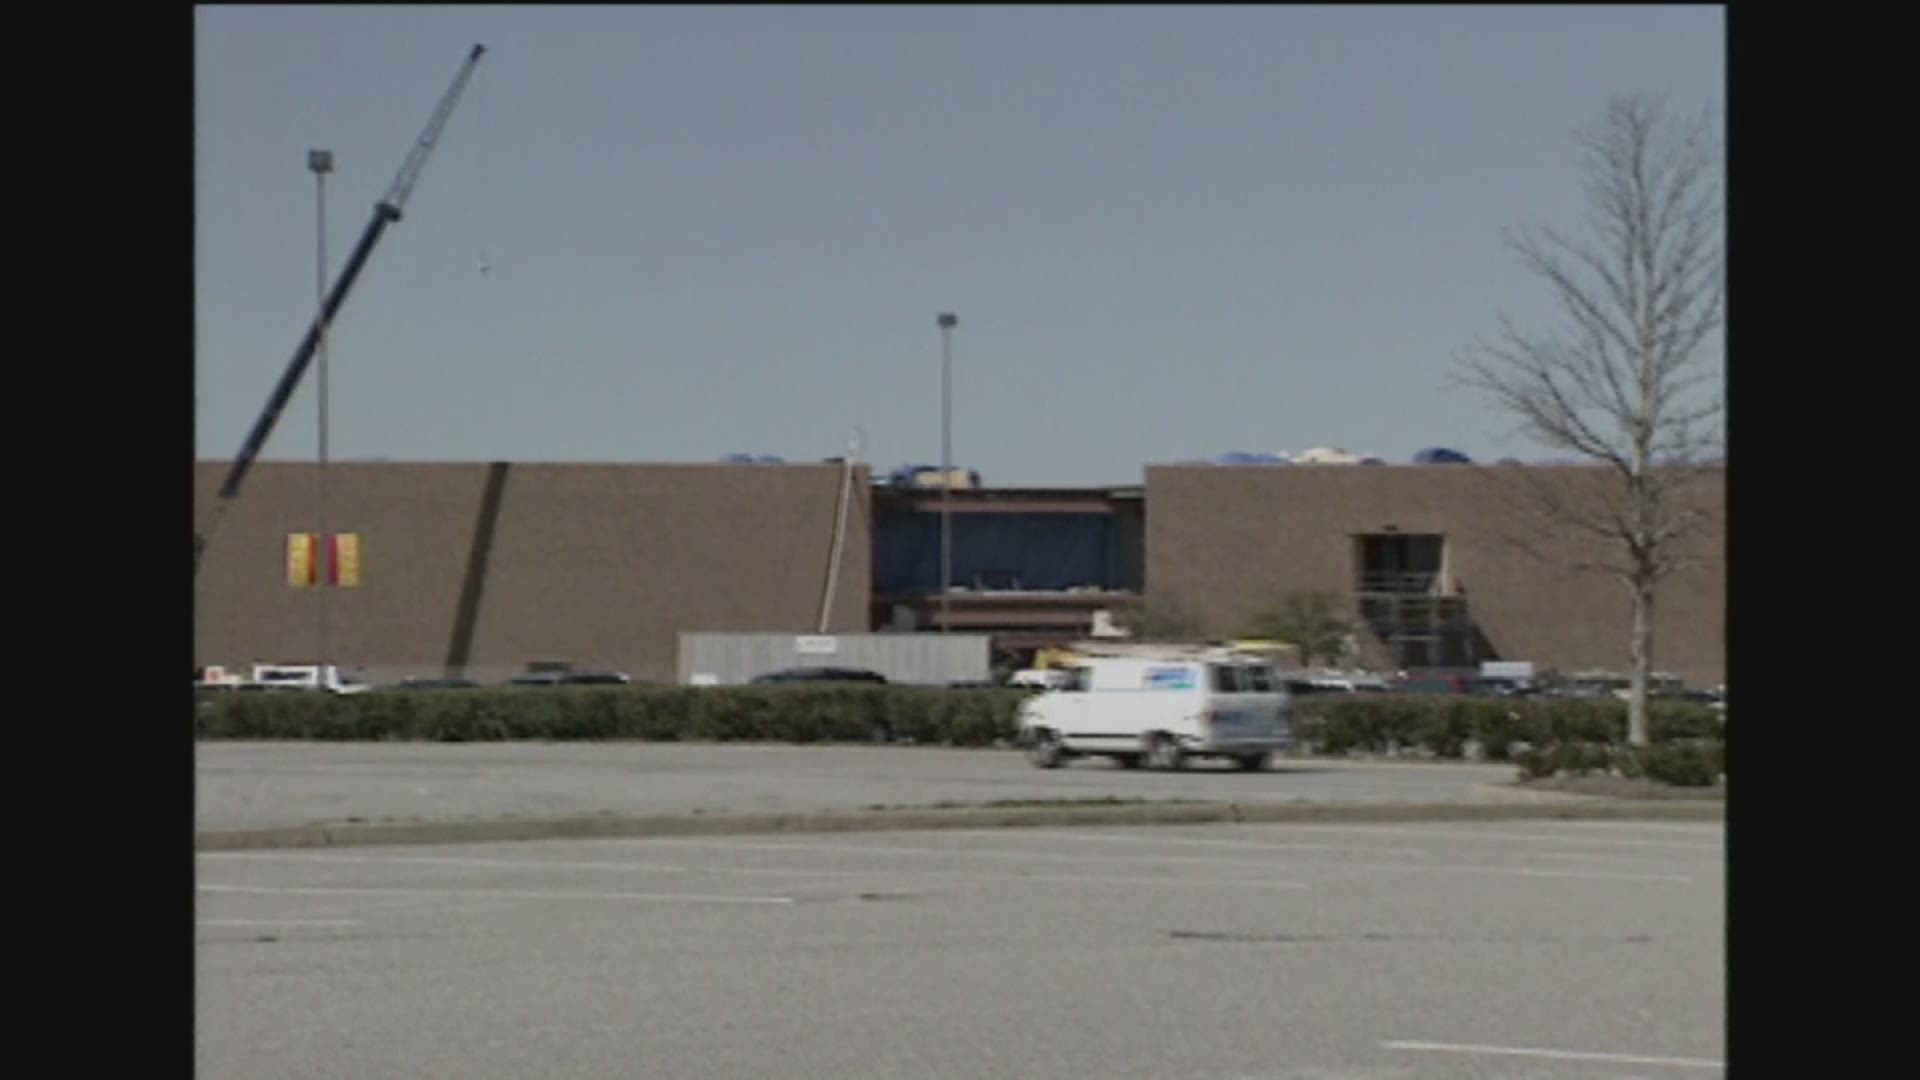 3/12/1999: When MacArthur Center opened in 1999, other Hampton Roads malls saw opportunities to thrive and expand.  Twenty years later, many of these malls now struggle to bring in business.